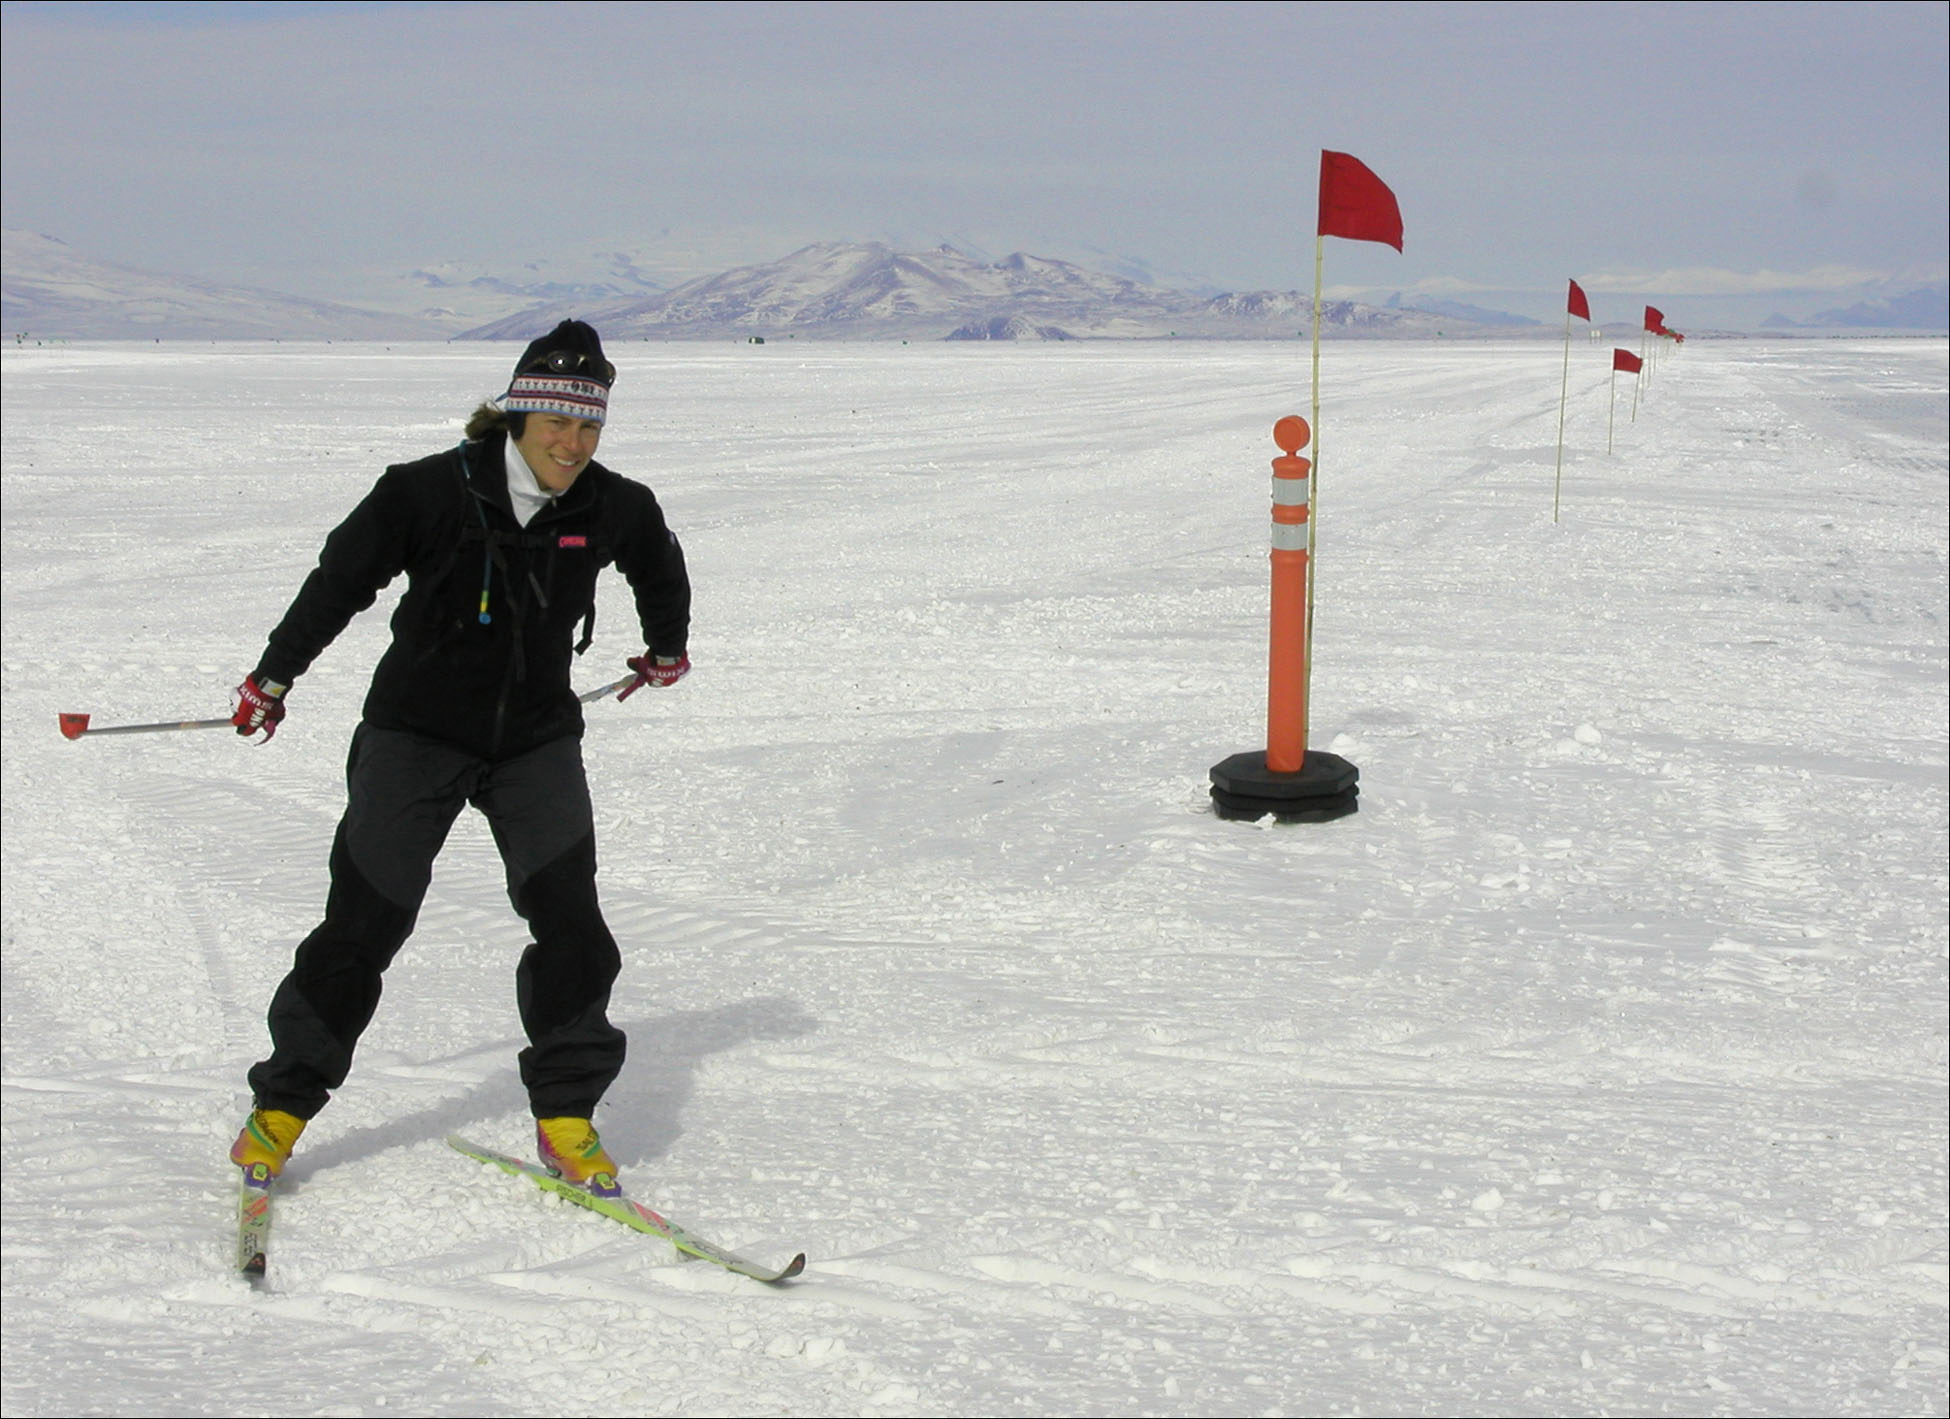 A woman cross-country skis.